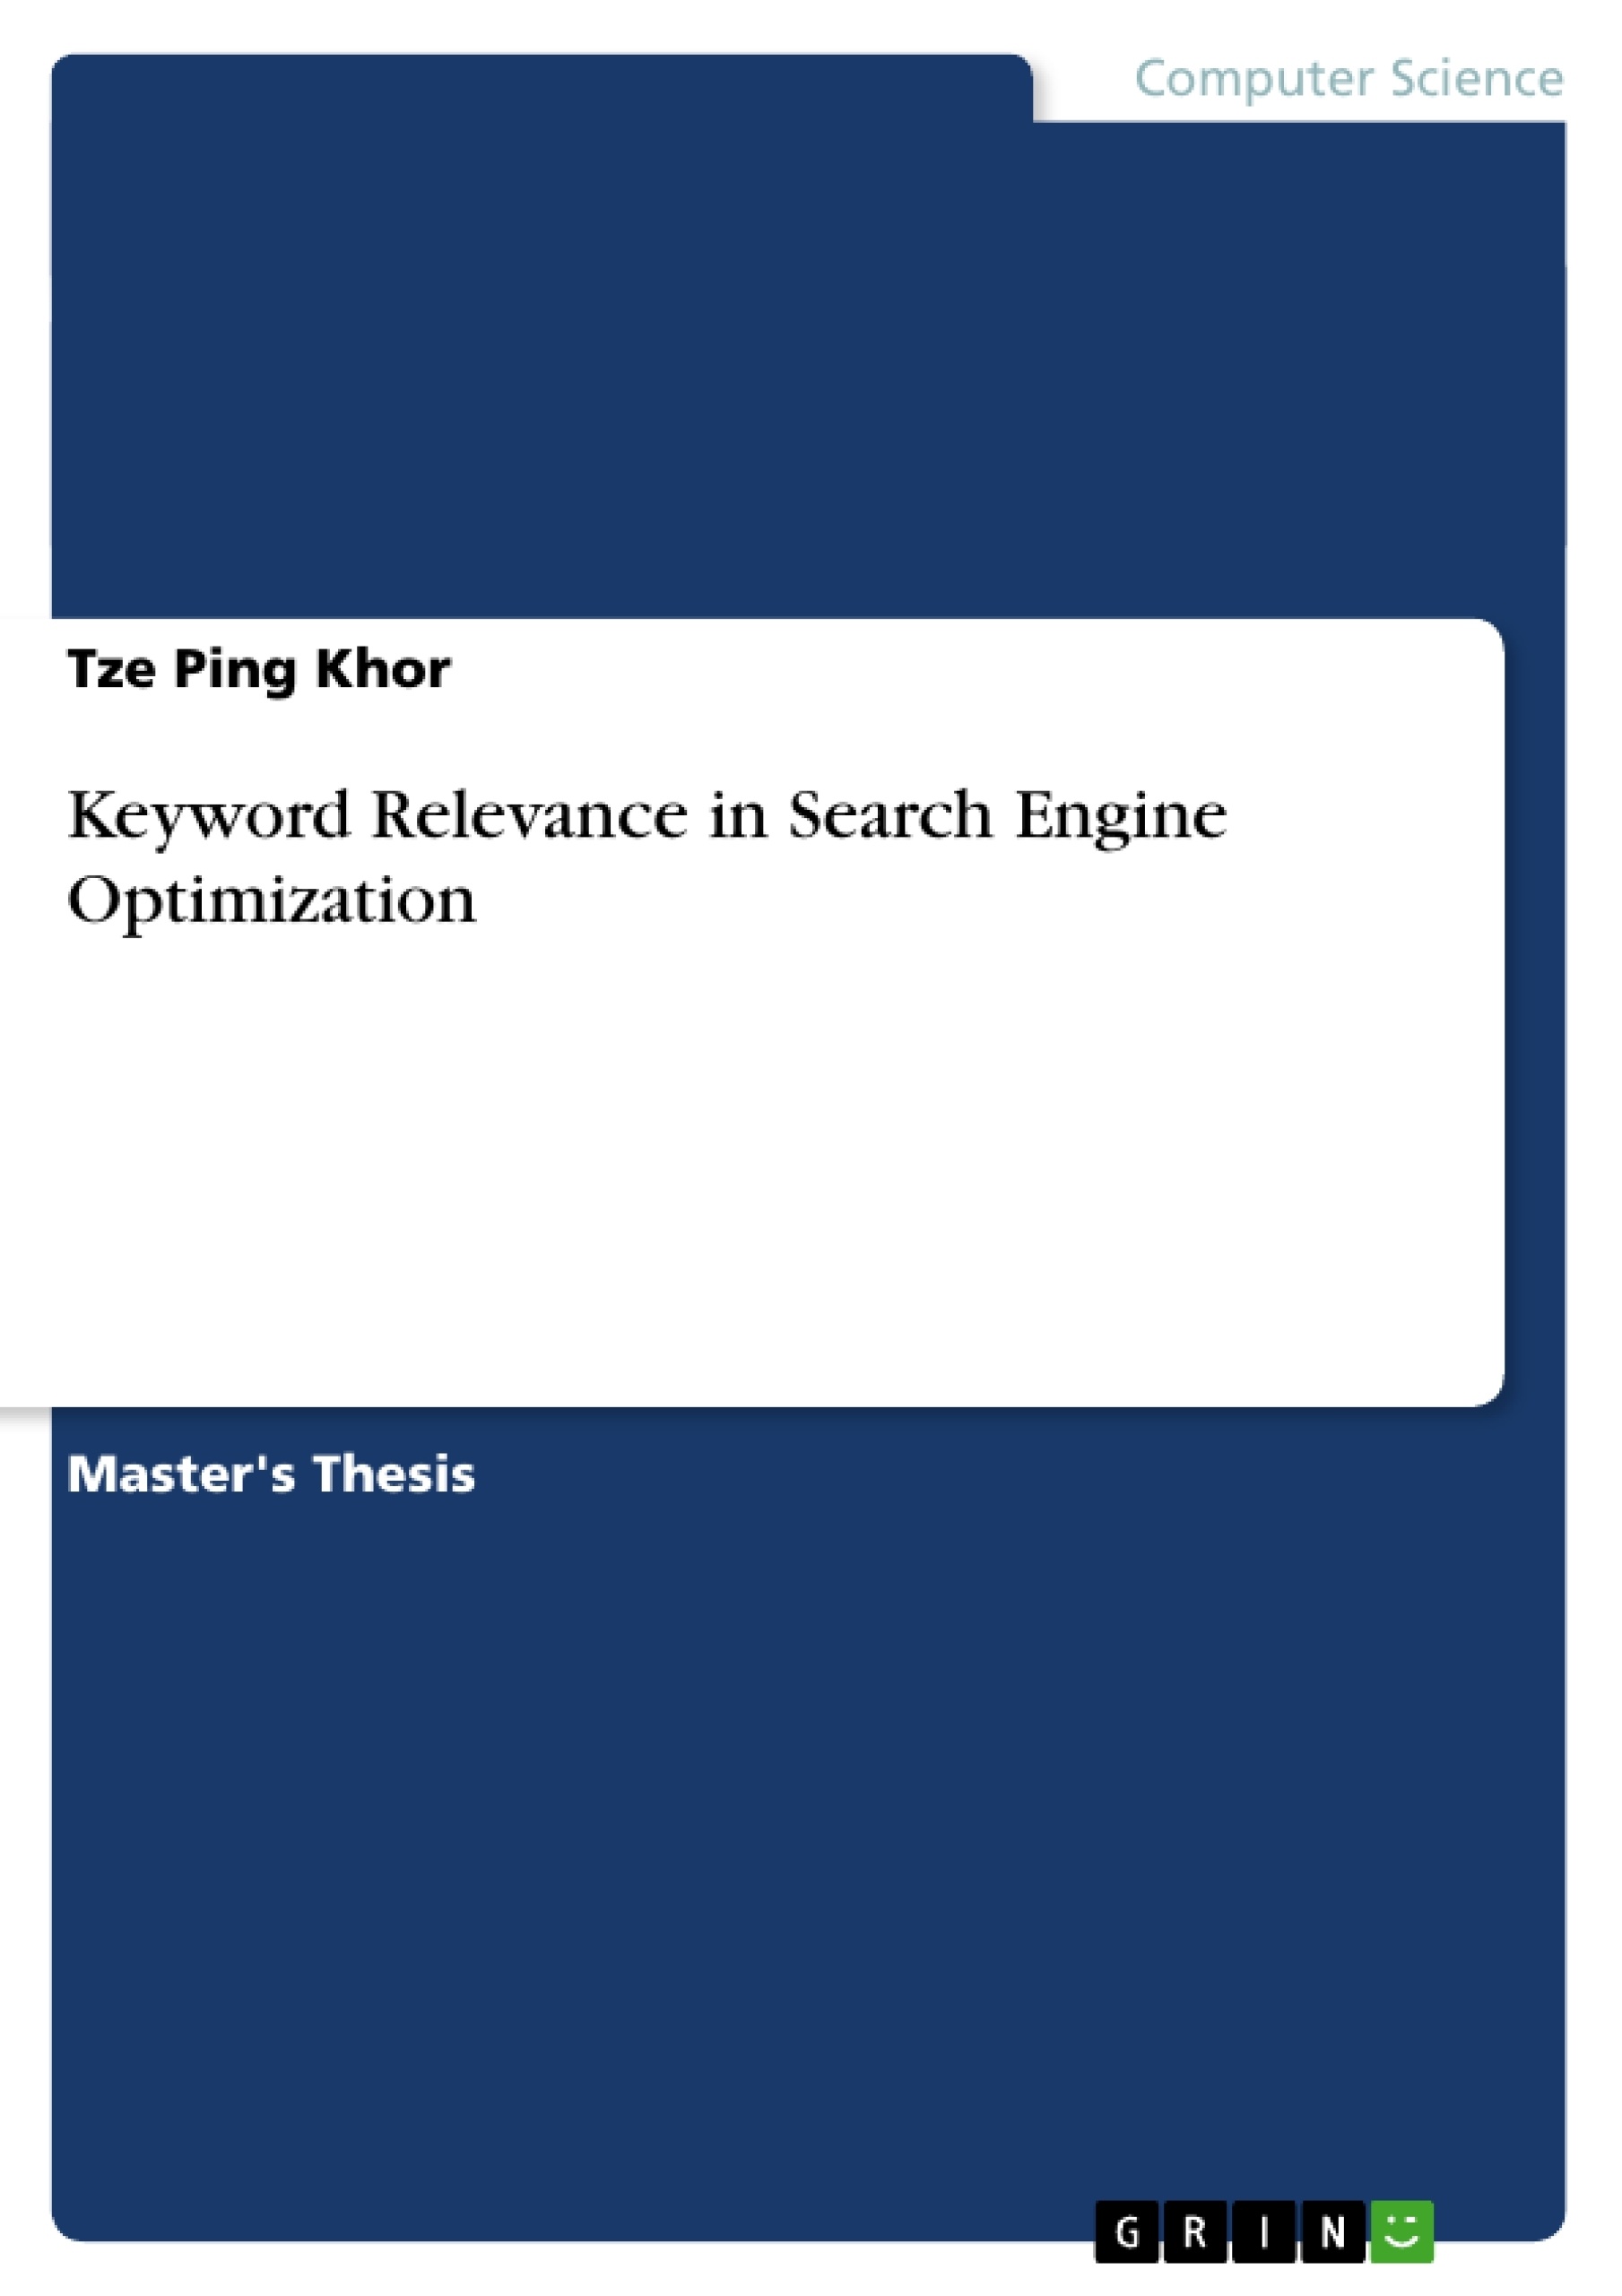 Thesis on search engine